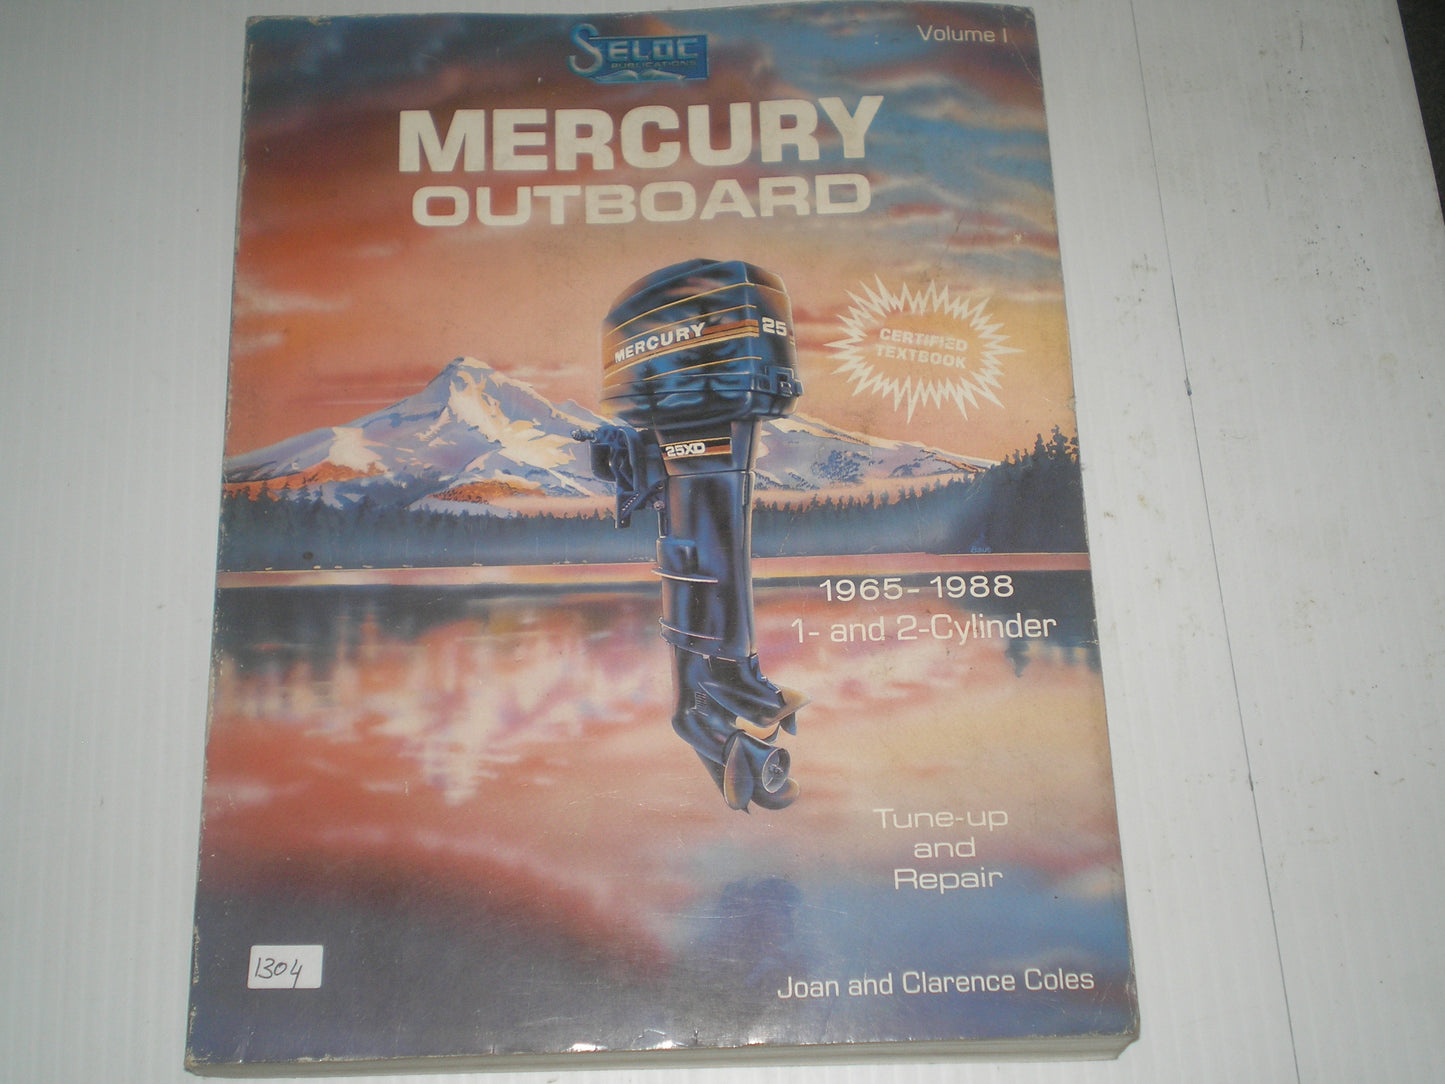 MERCURY  Outboard Motor 1 & 2 Cylinder  1965-1988  Tune-up and Repair Marine Manual  #1304